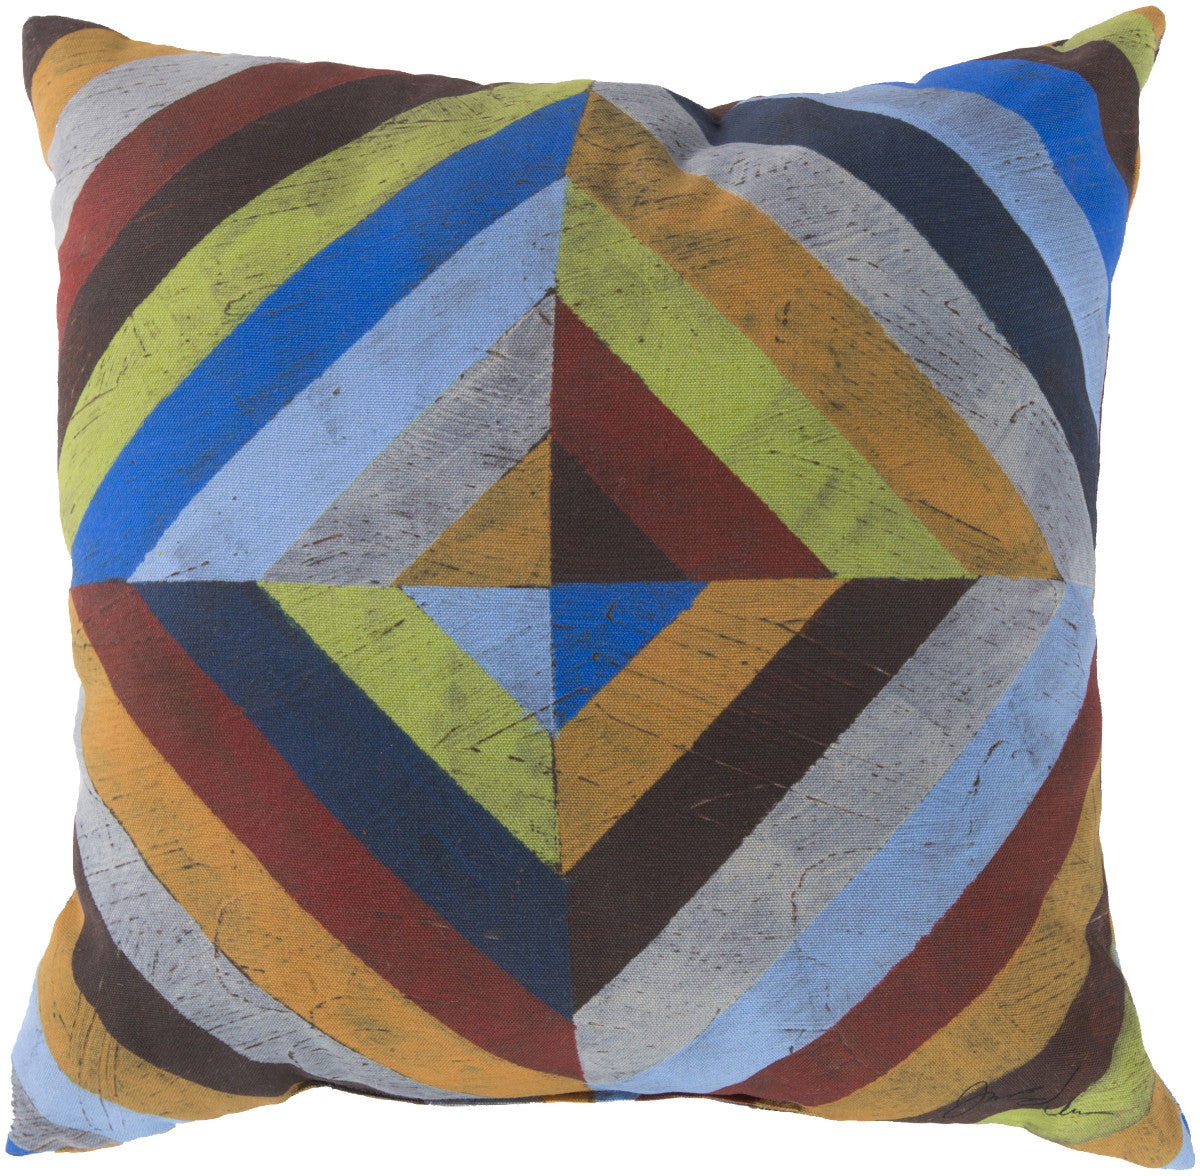 Surya Rain Charm in Color and Shape RG-005 Pillow